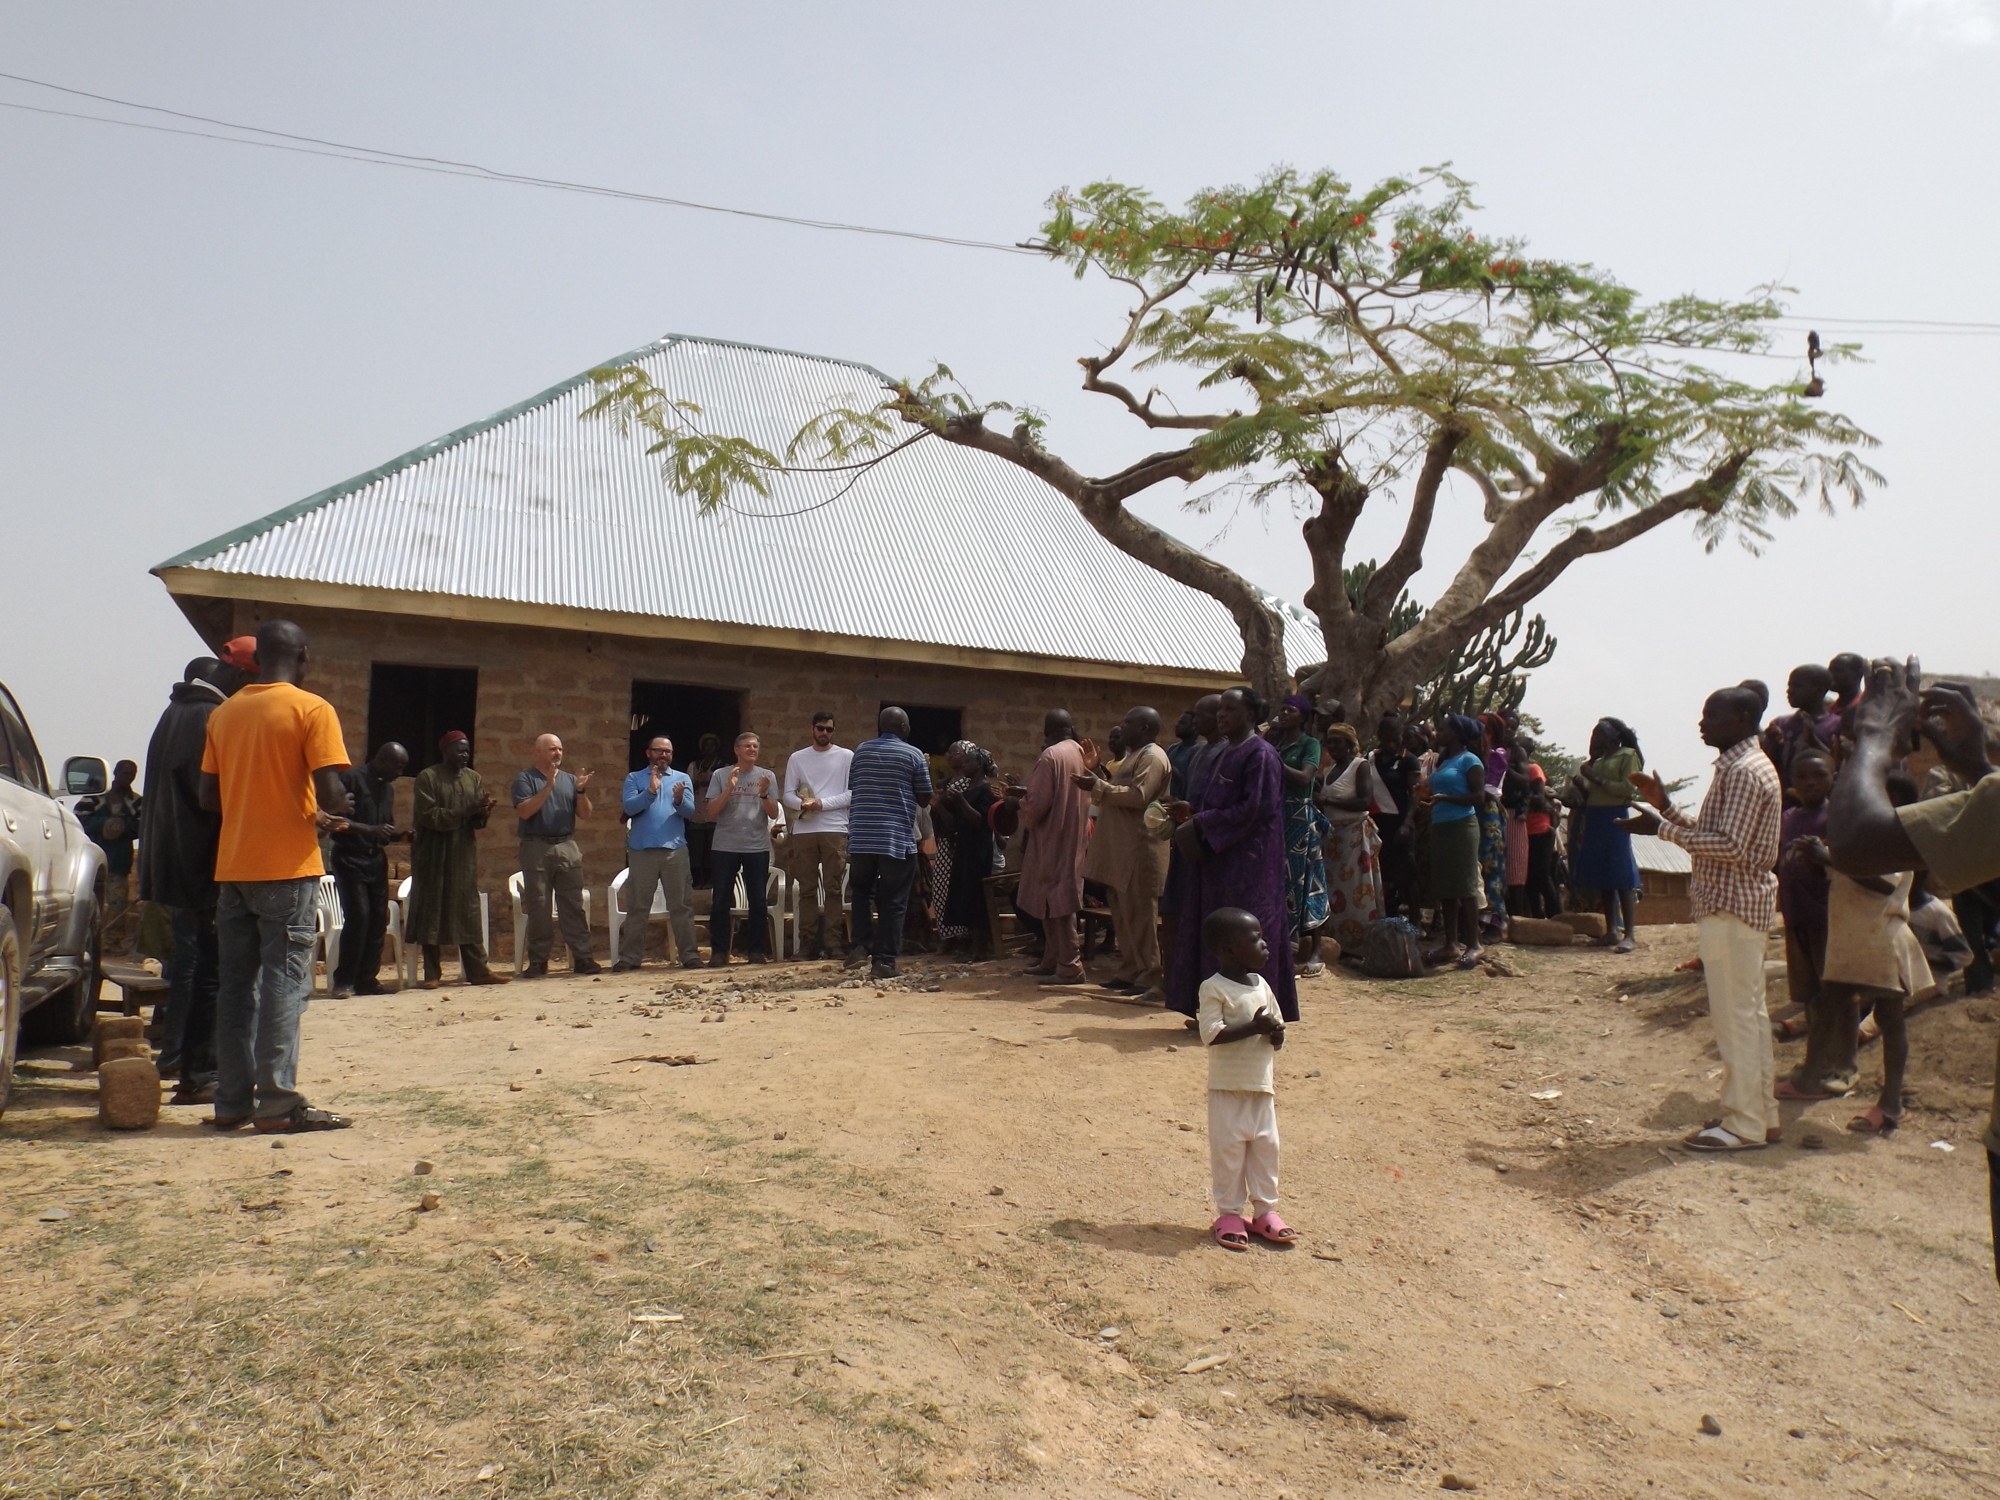  The entire village showed up for the dedication of the pastor’s new home.